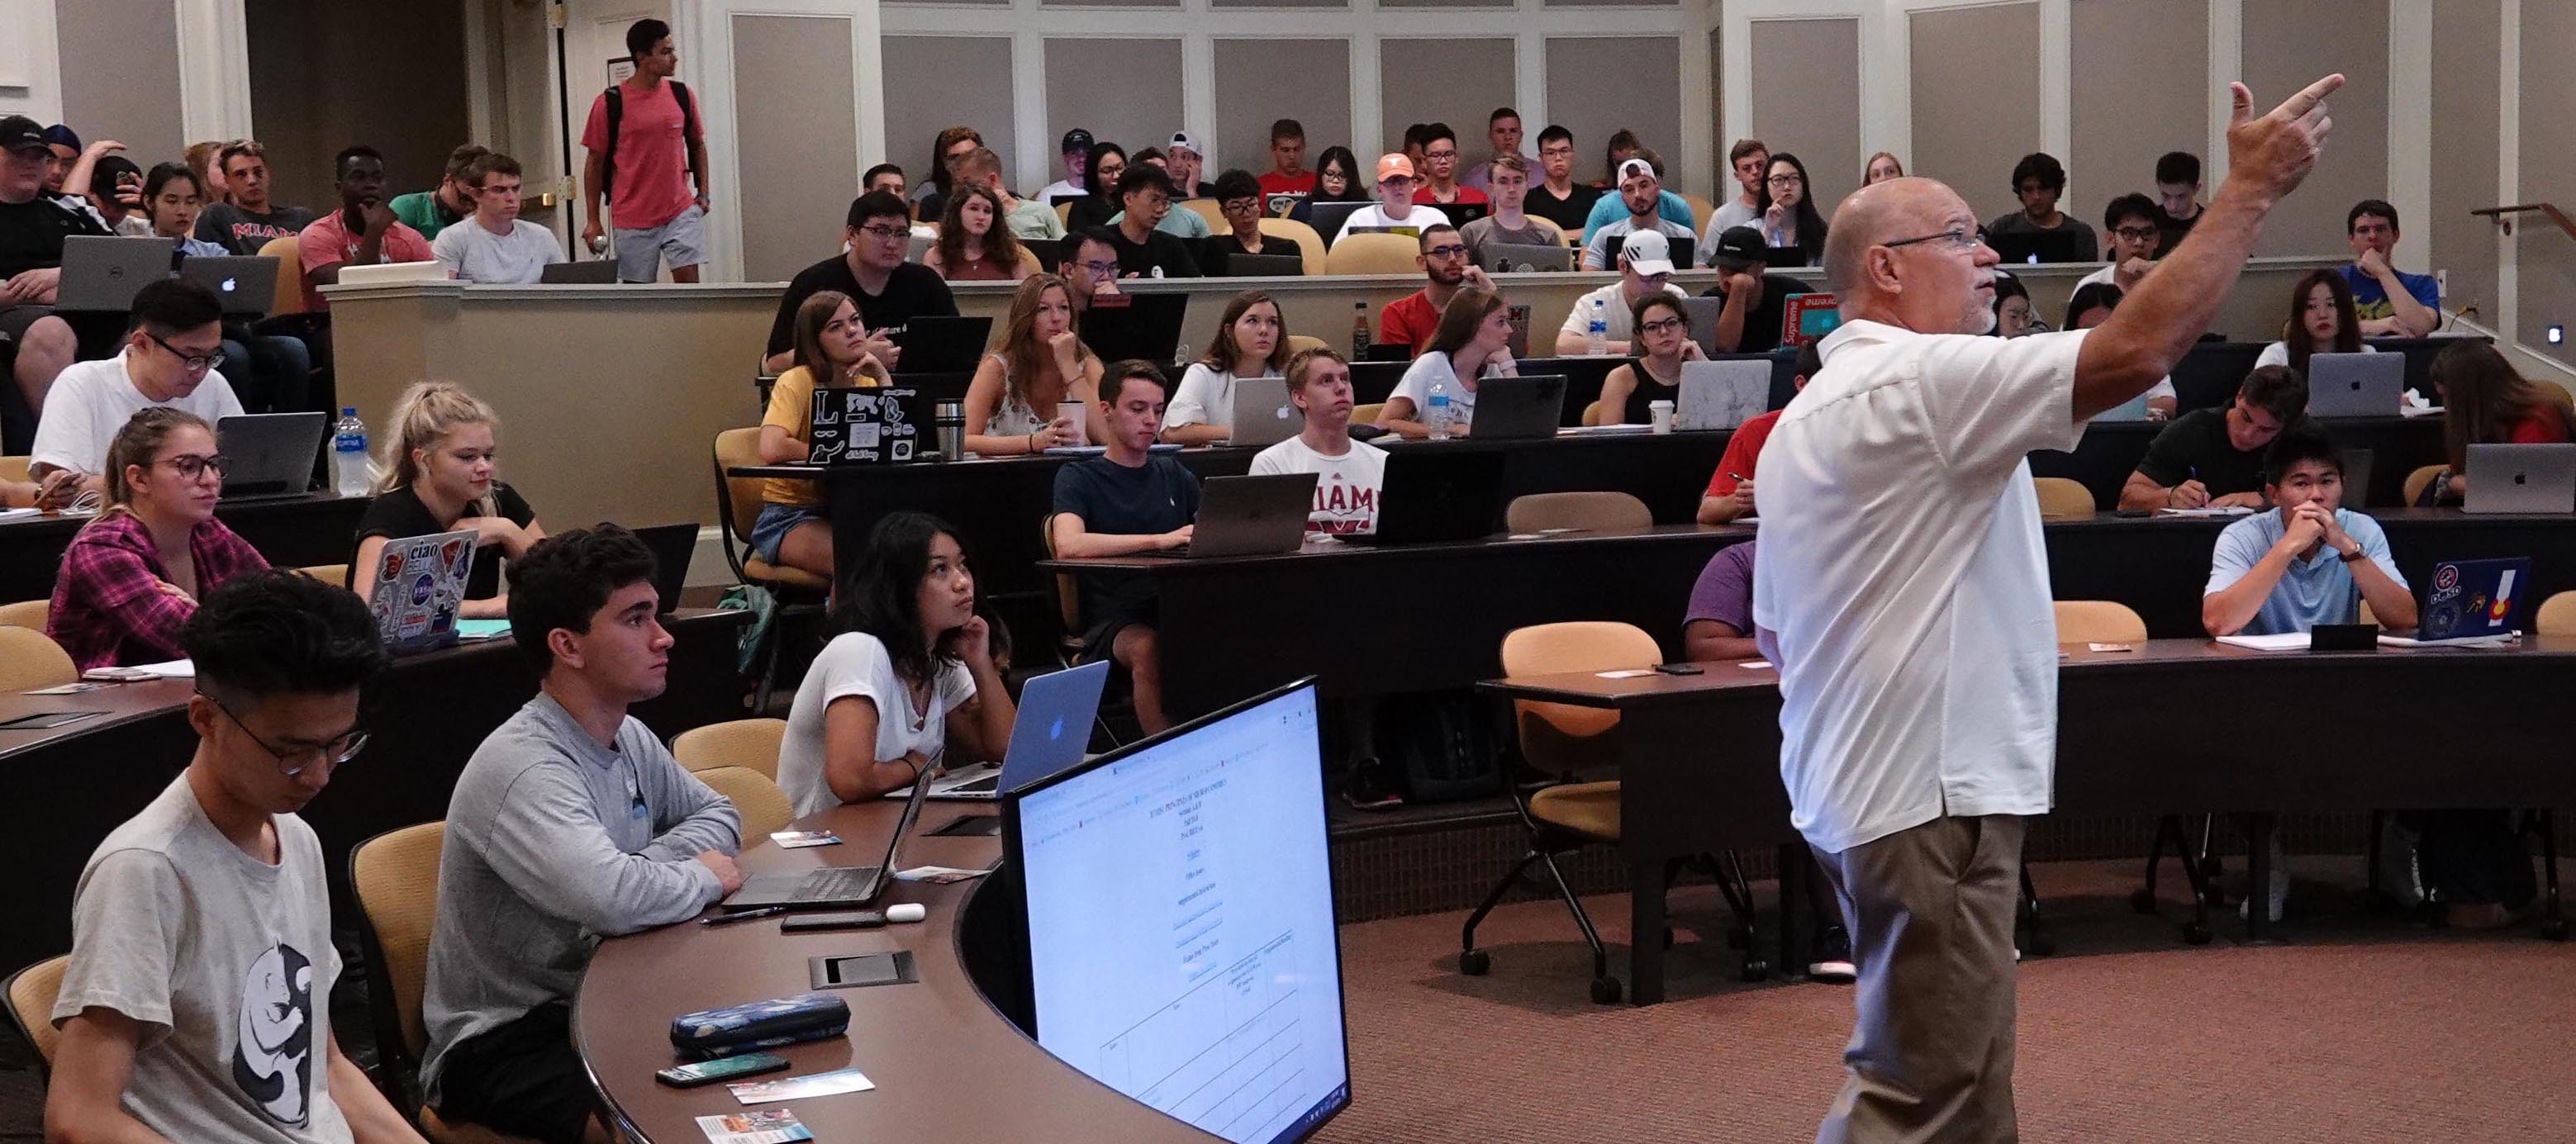  Instructor gestures toward the screen during the first day of classes